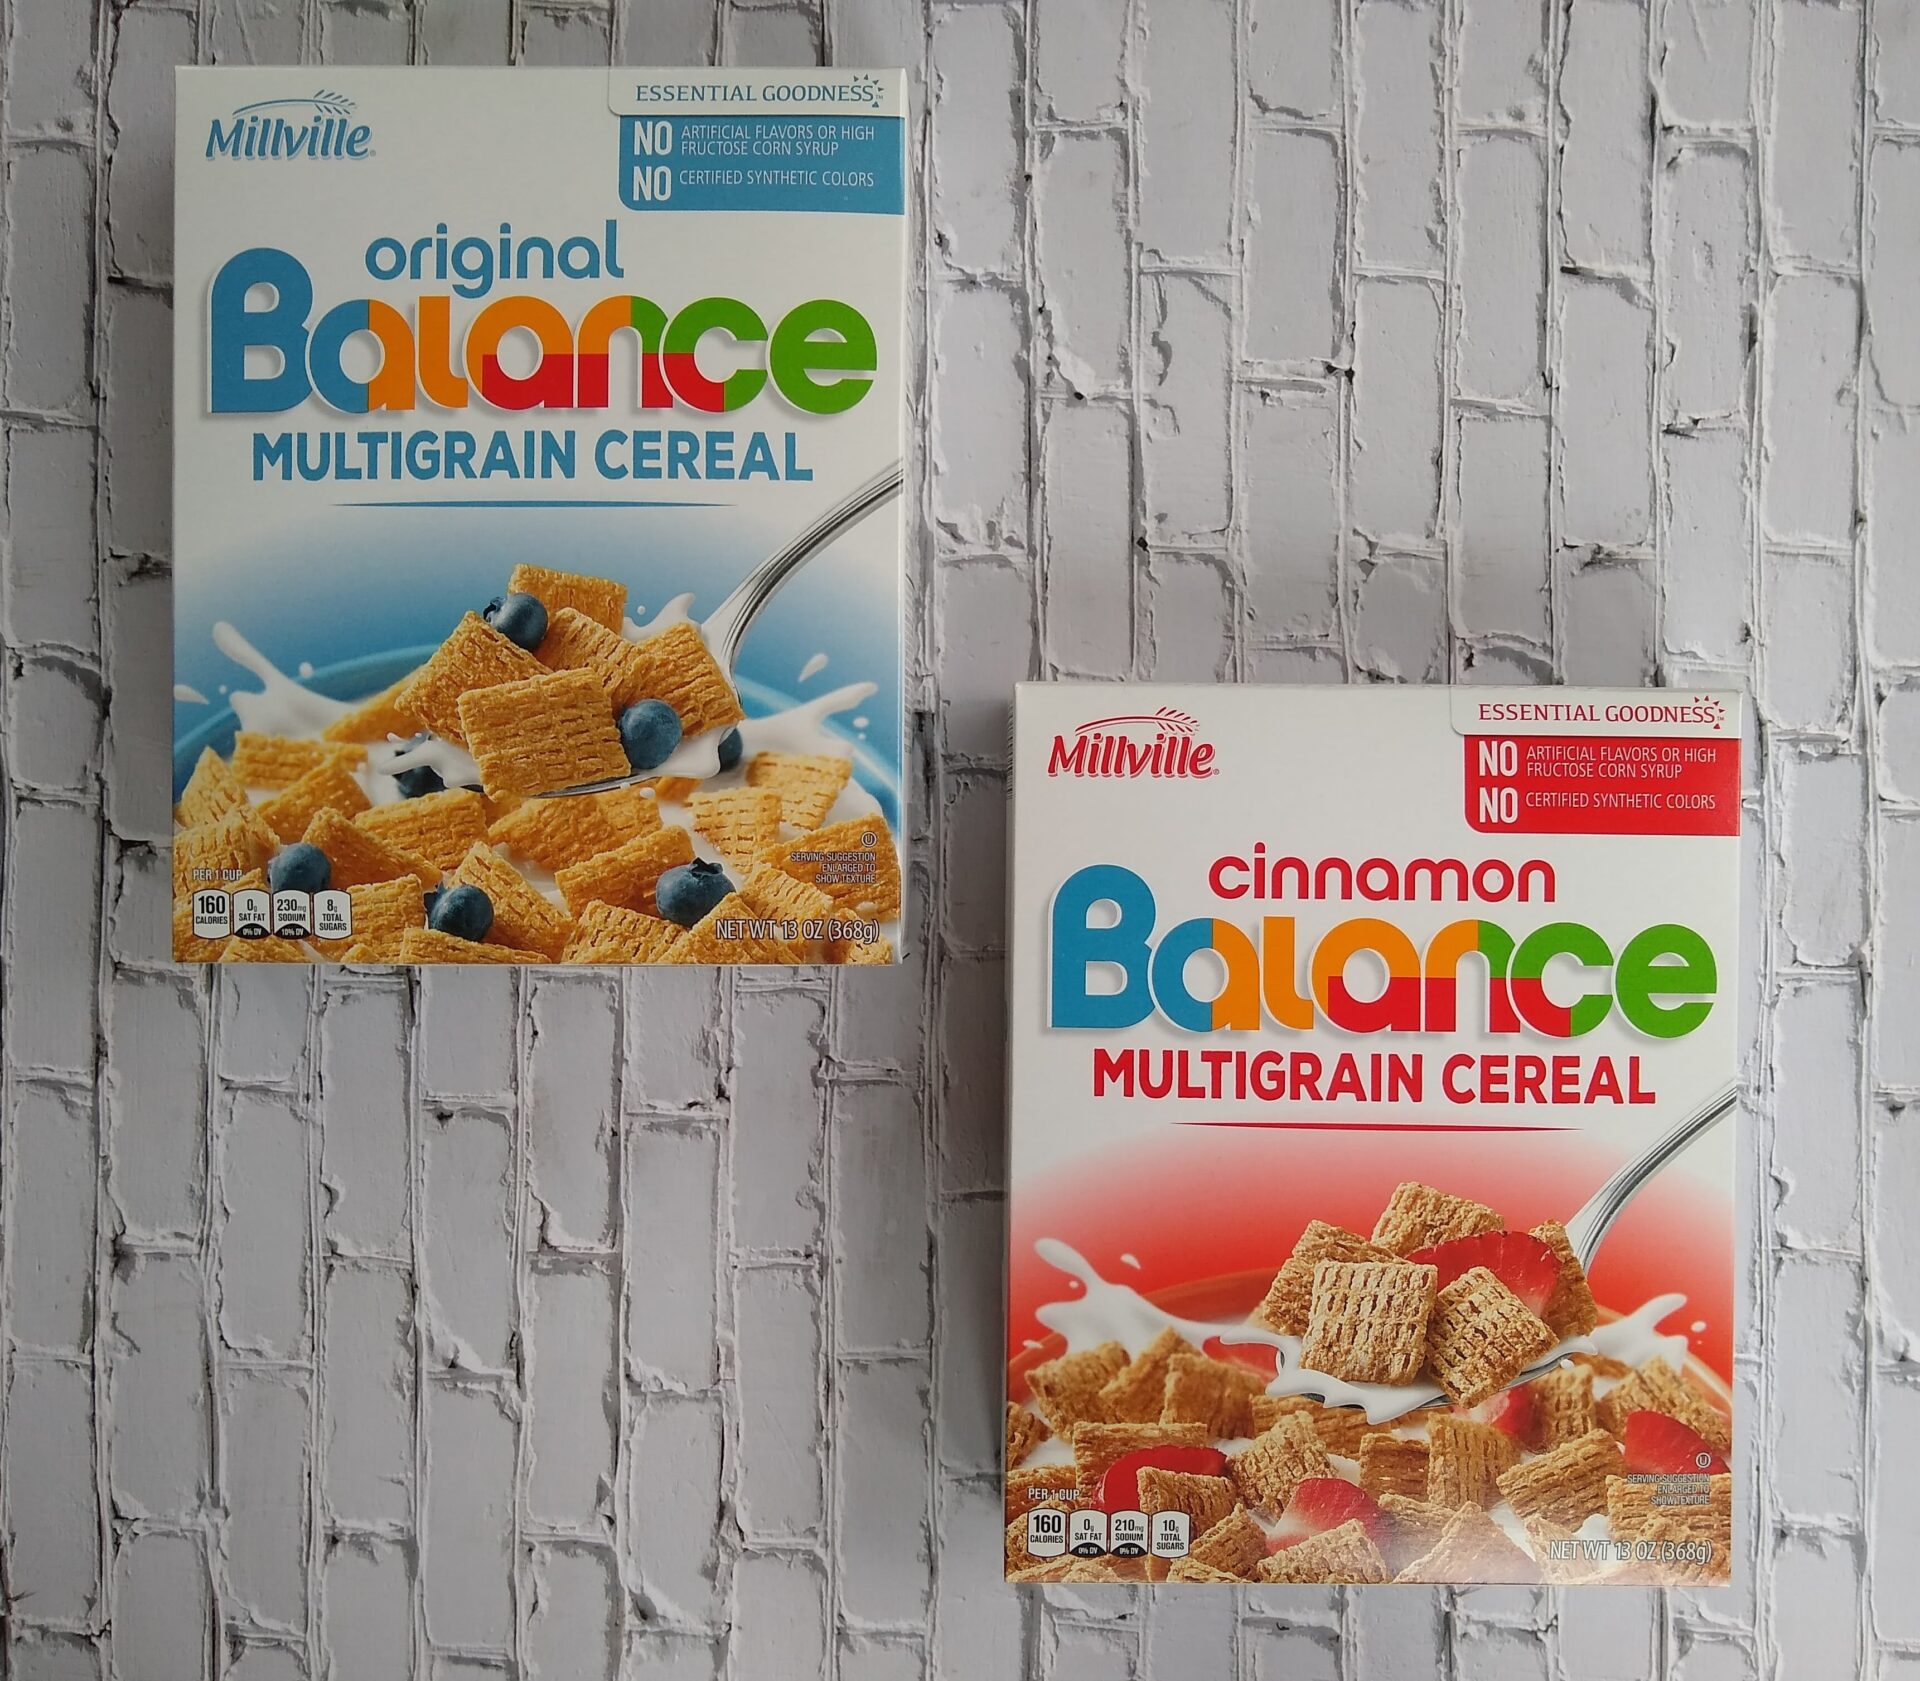 Millville Balance Cereal